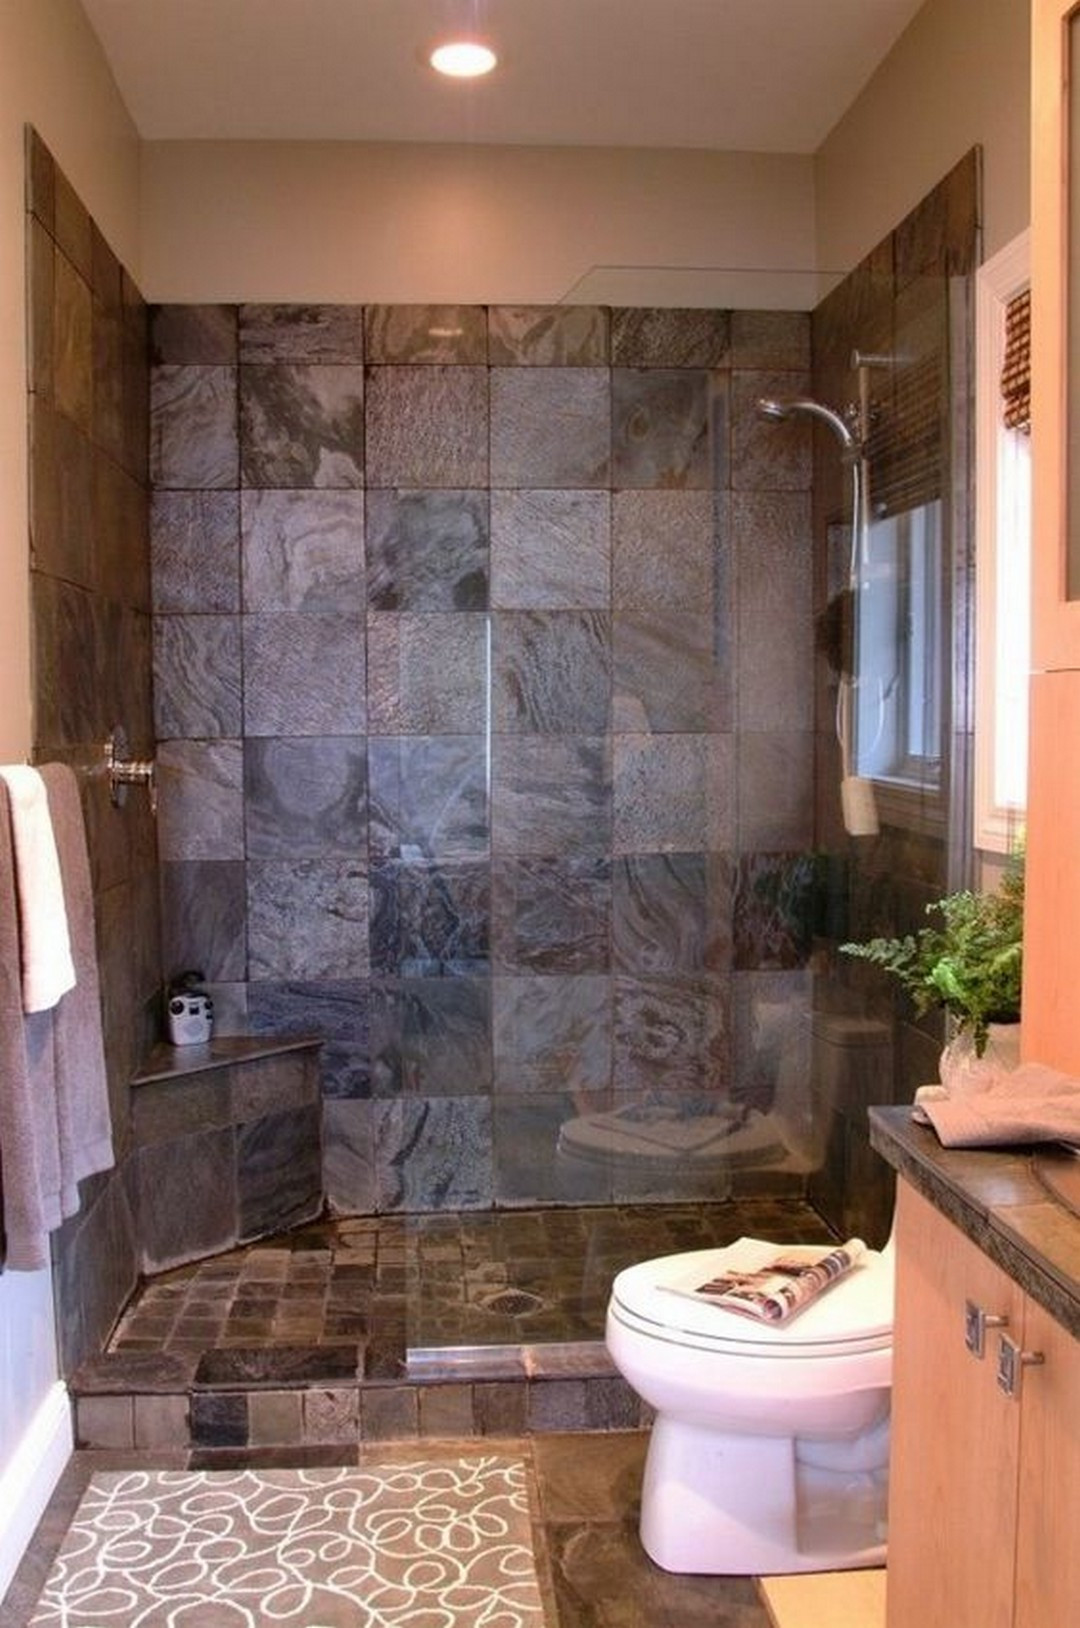 Small Space Bathroom Ideas
 How to Begin Bathroom Renovation for Small Spaces with The